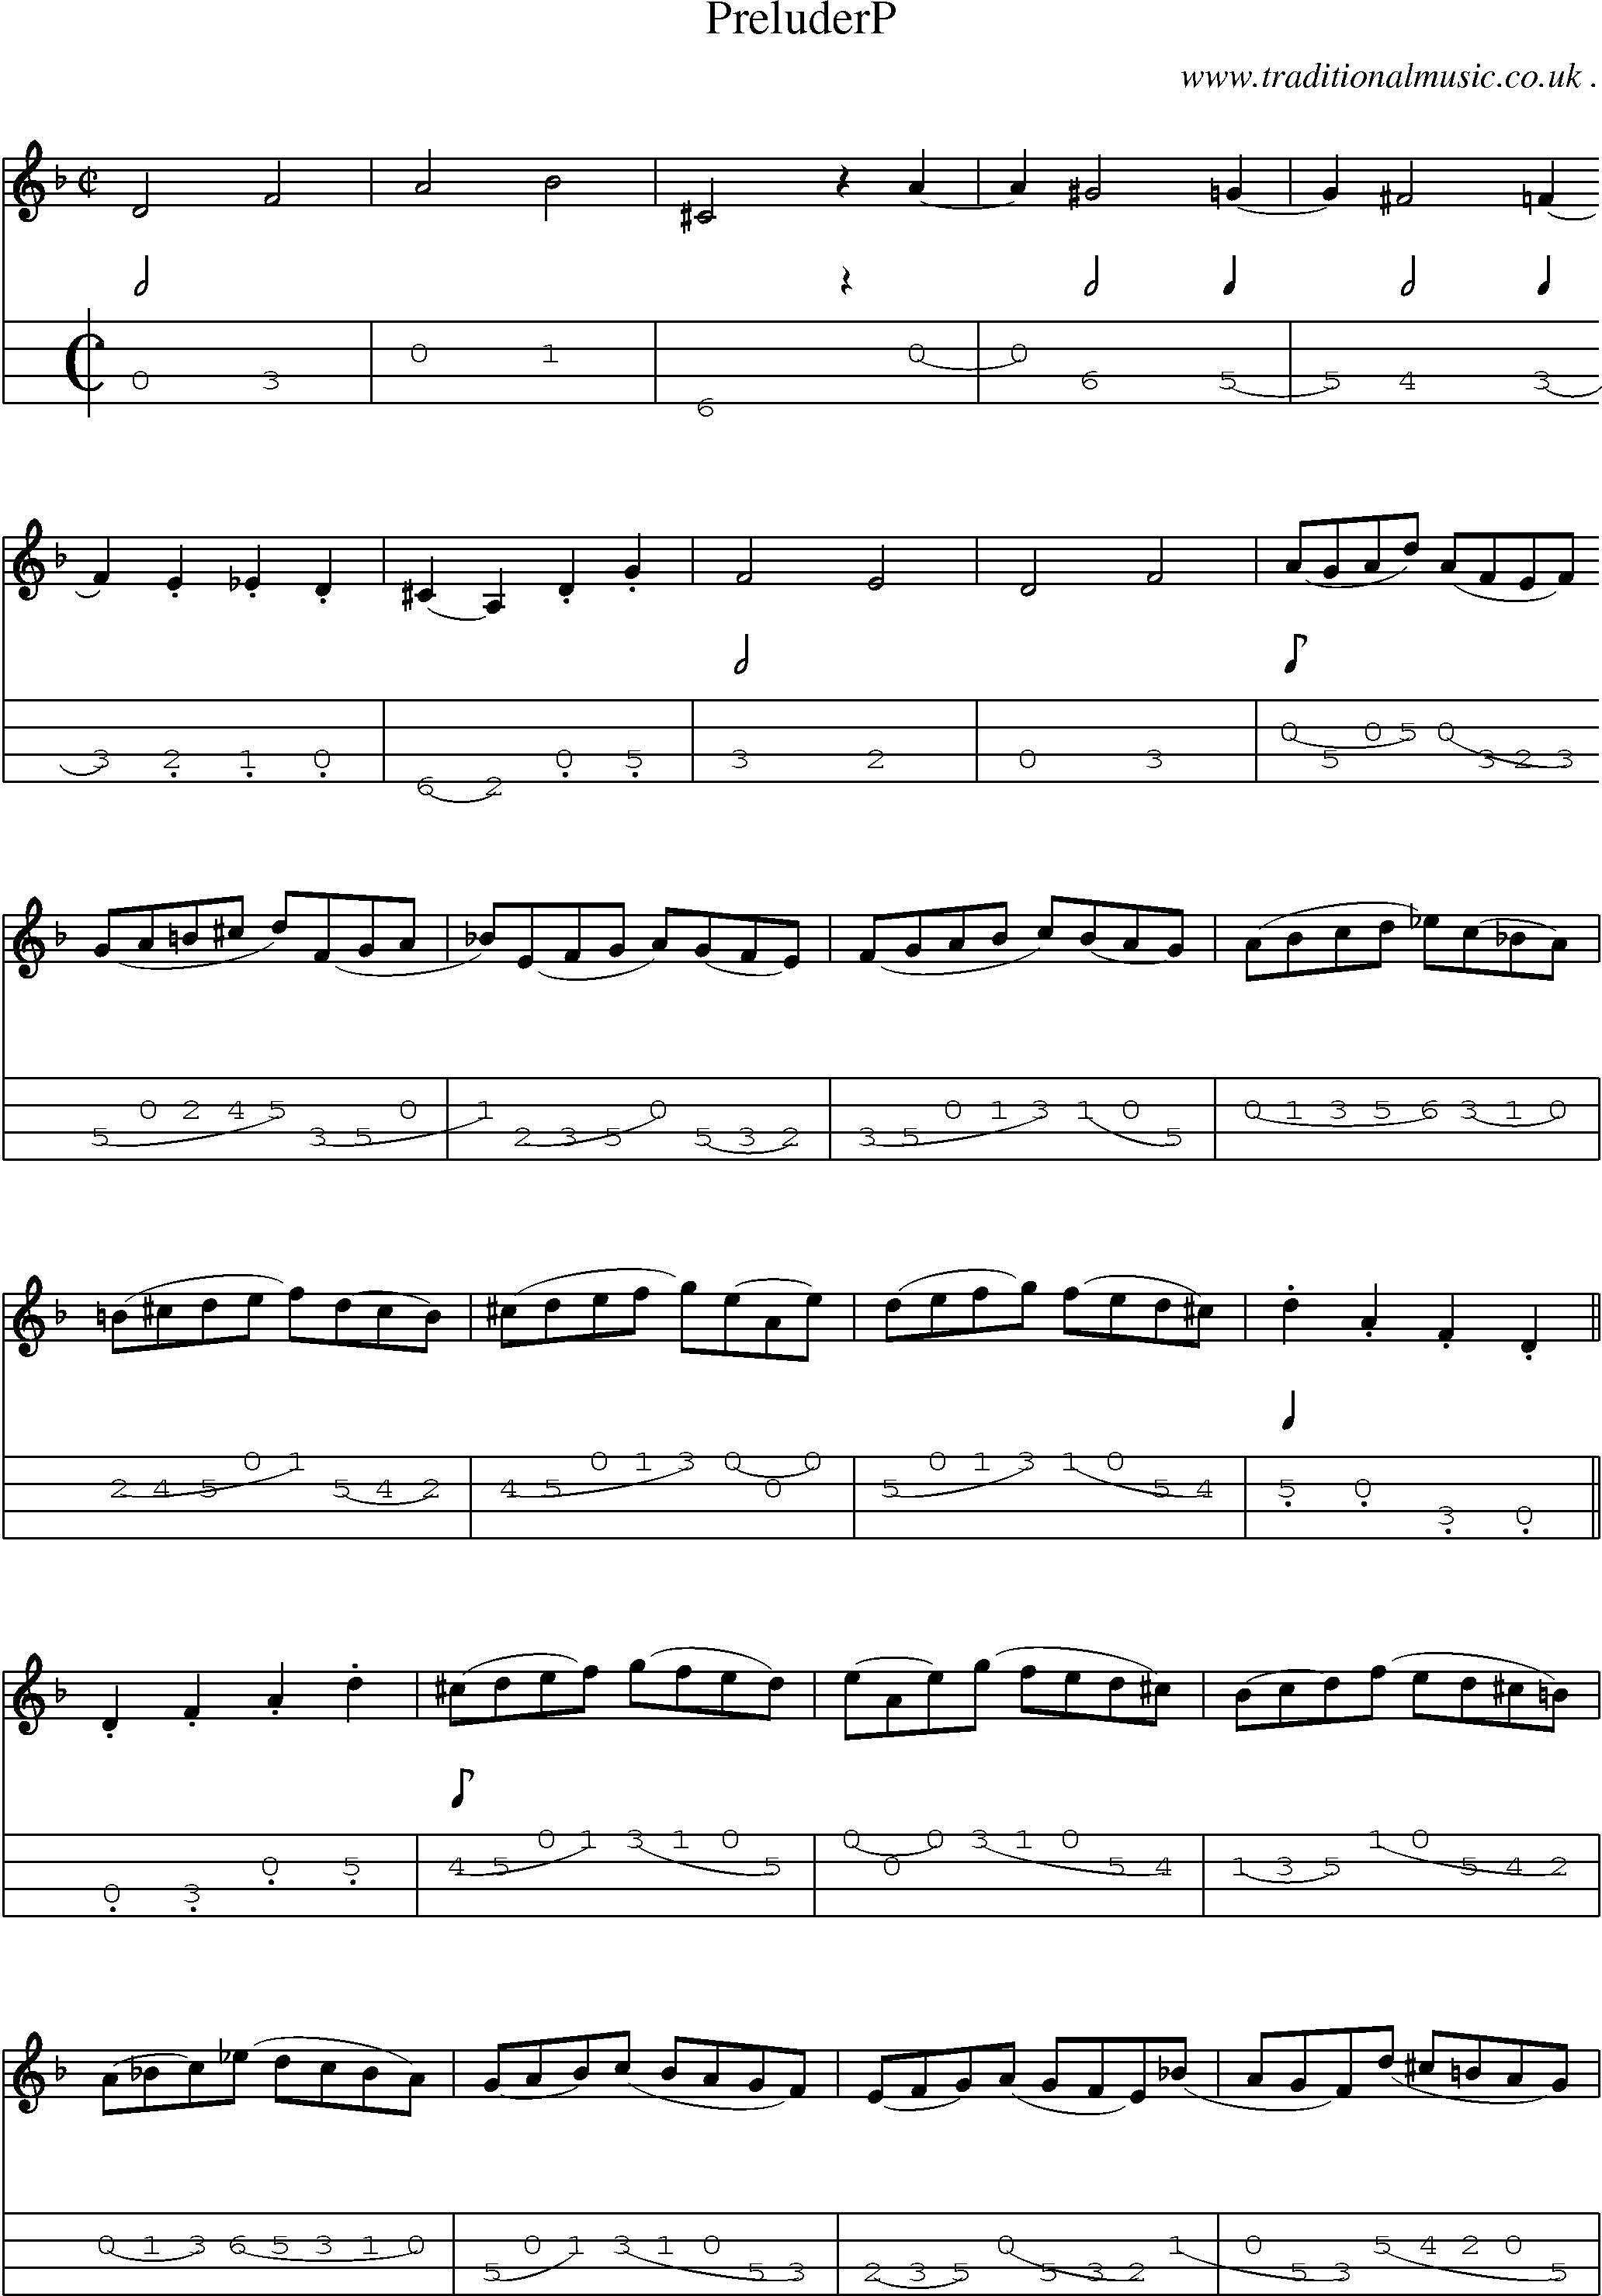 Sheet-Music and Mandolin Tabs for Preluderp